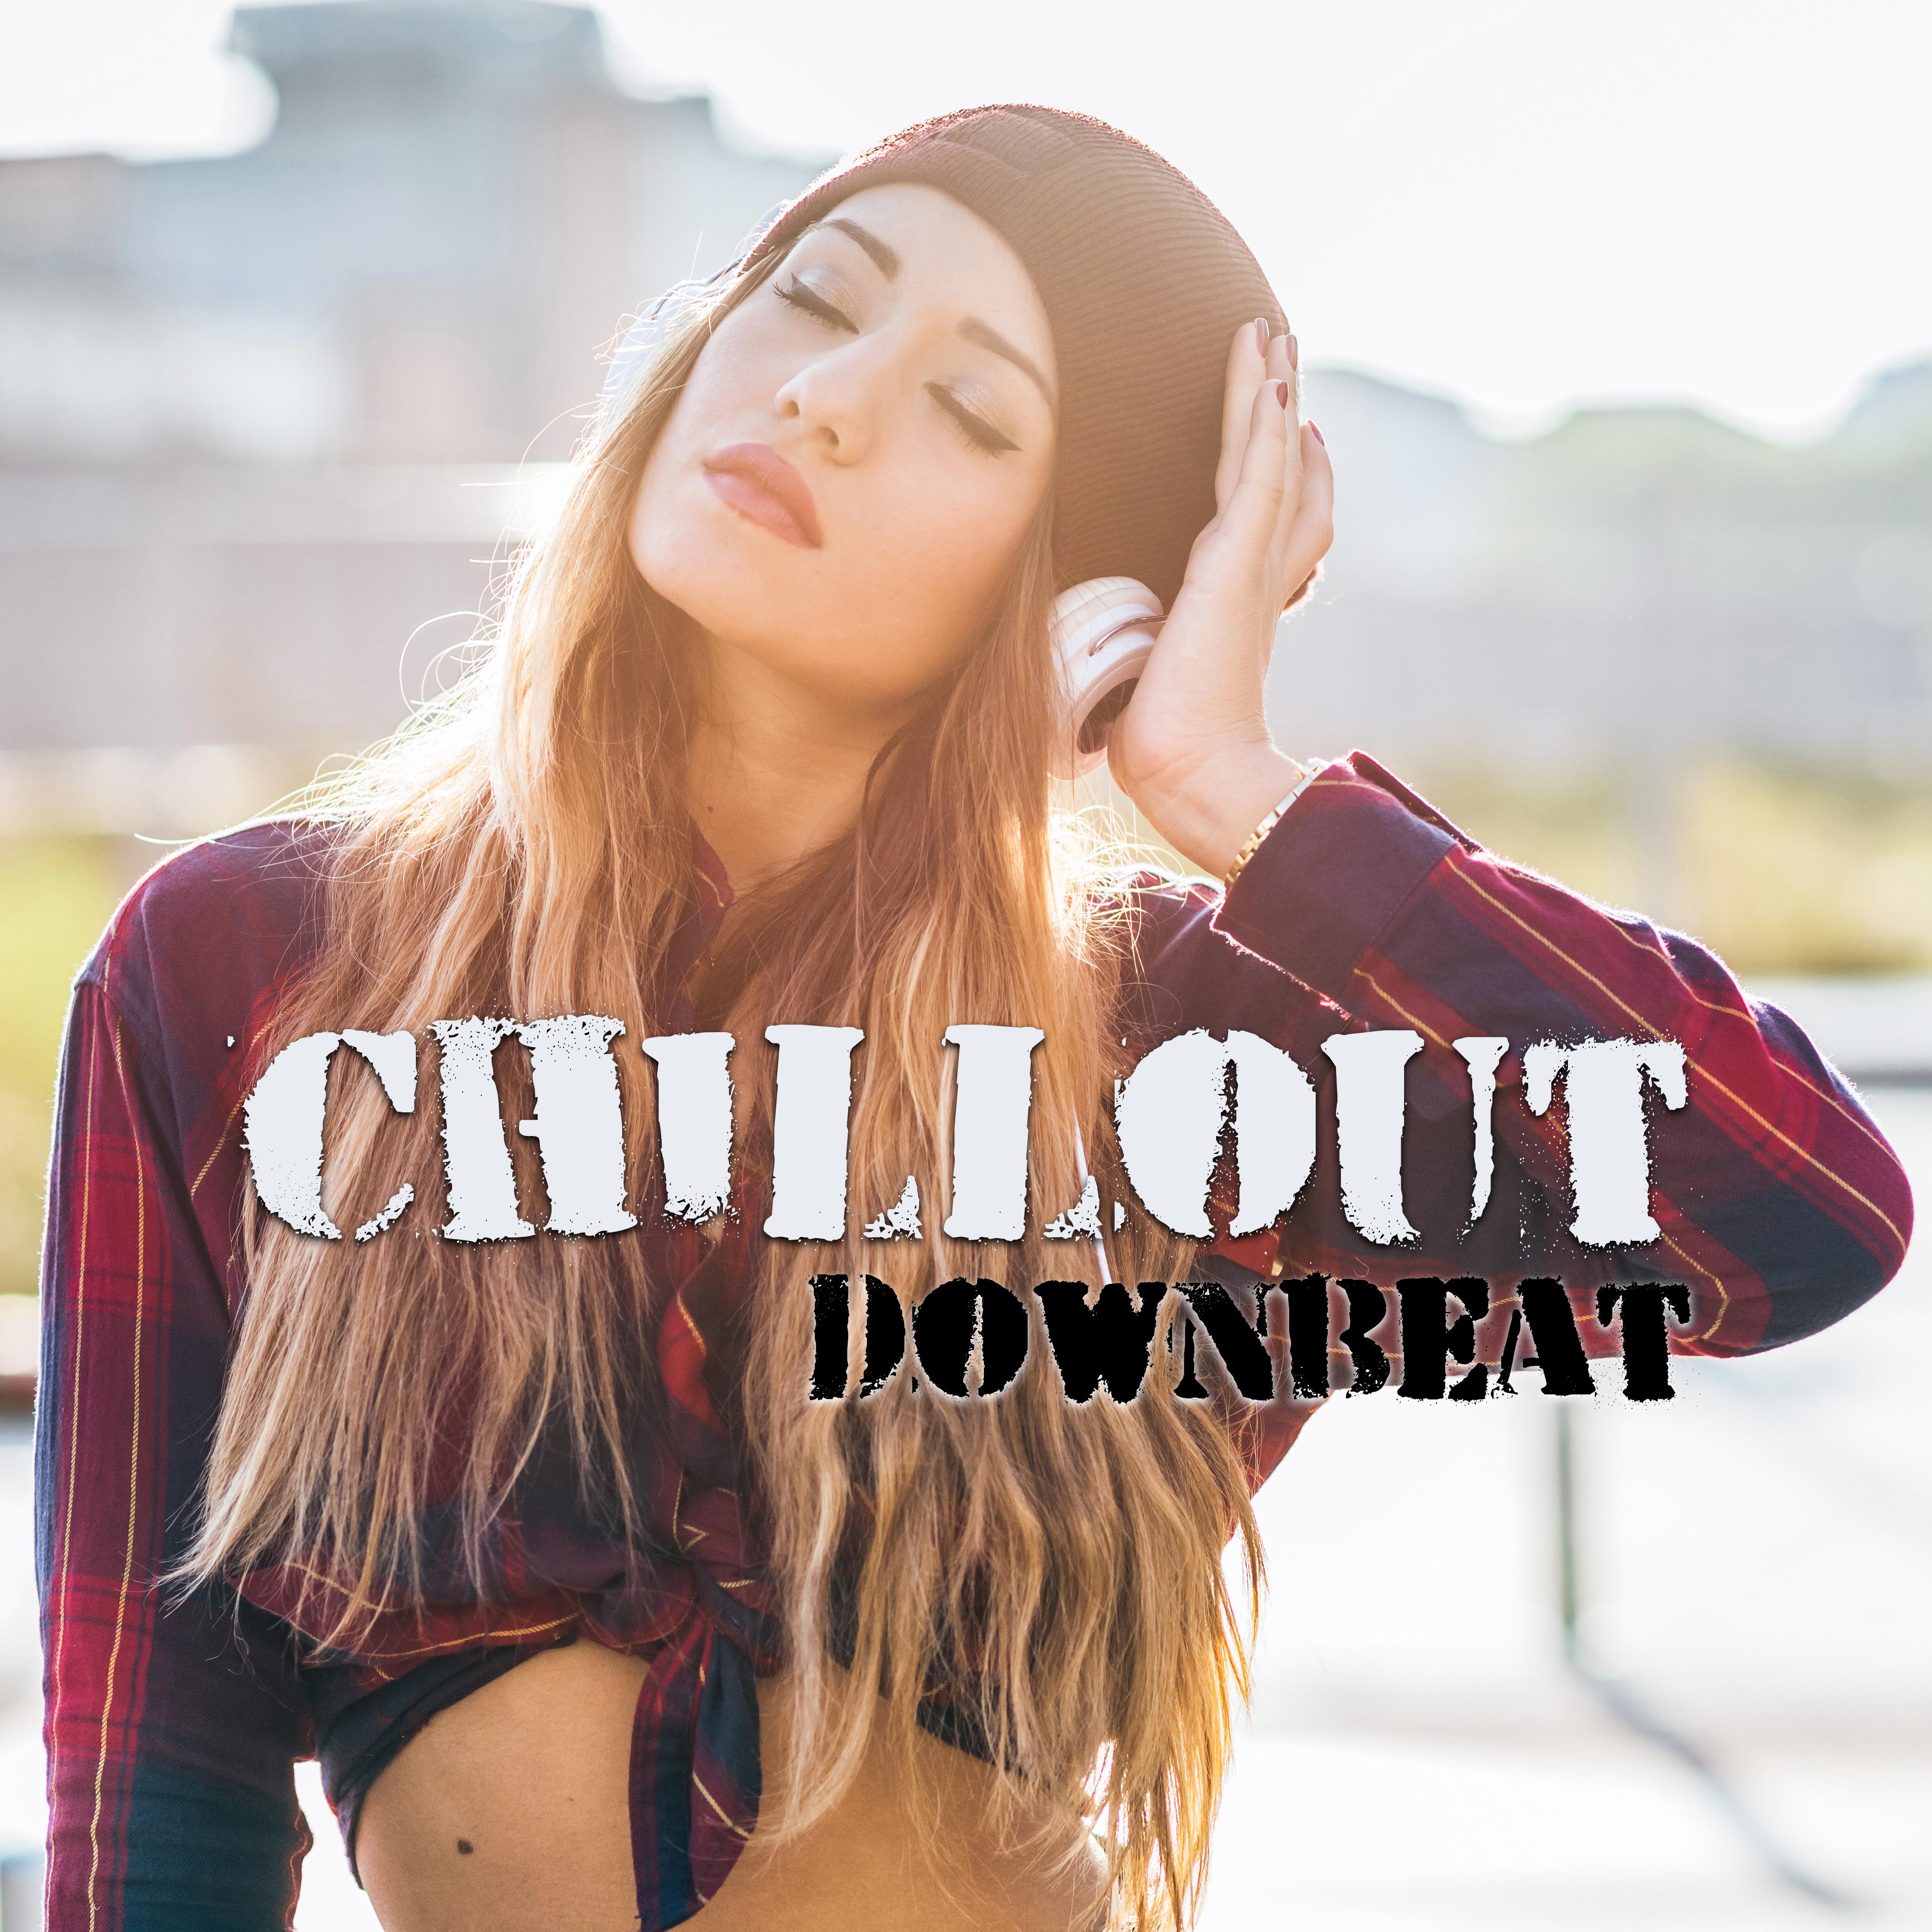 Chillout Downbeat  Lounge, Electronic, Ambient Music, Chill Out 2017, Summer Hits